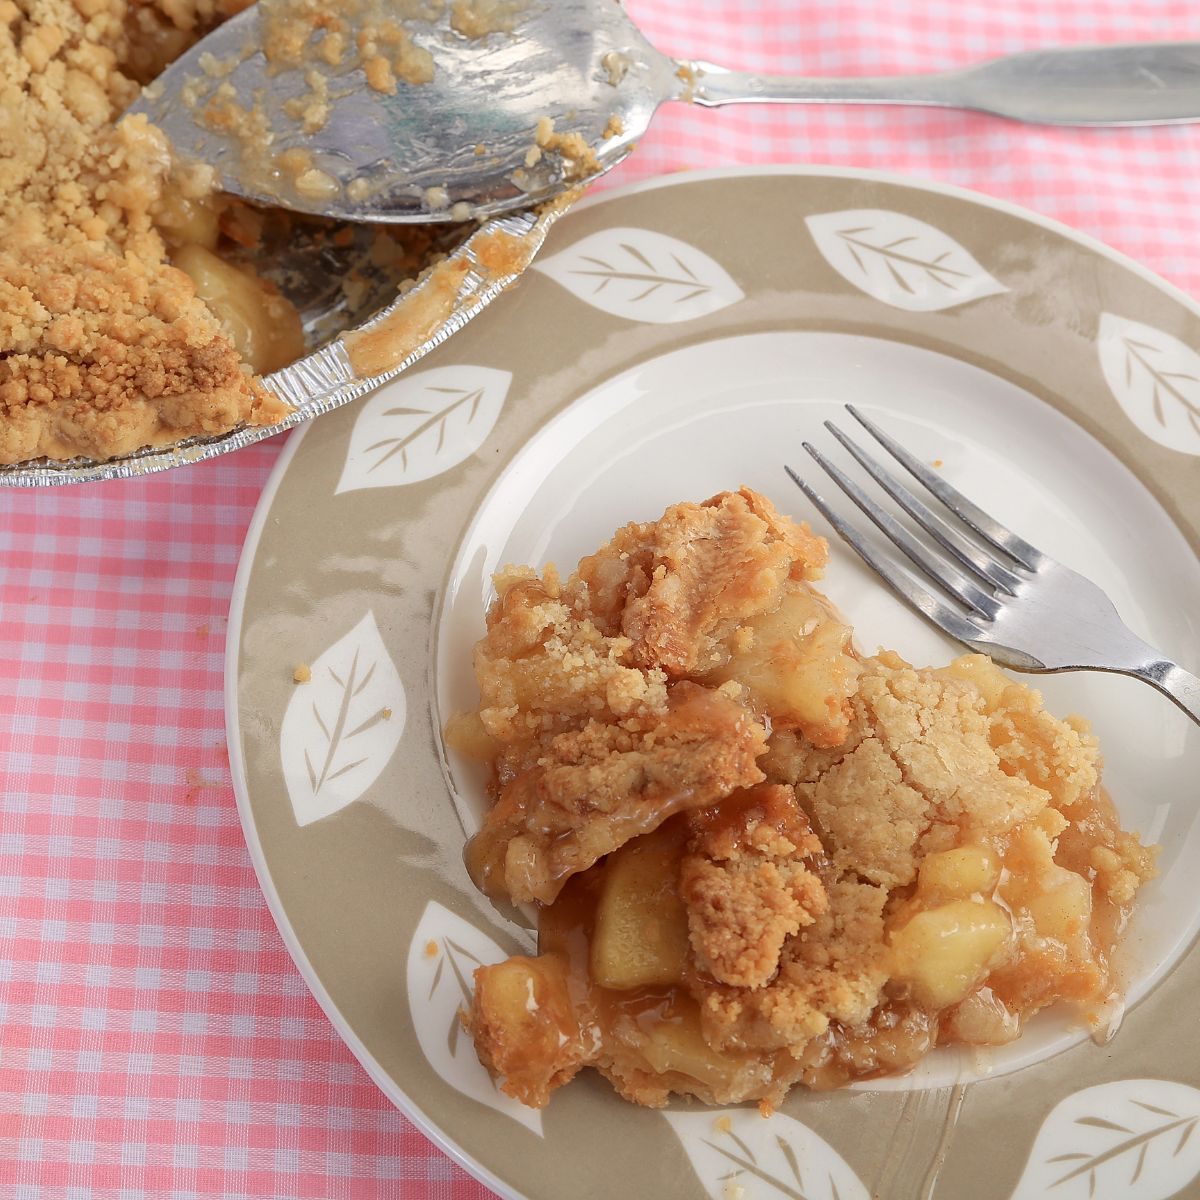 apple crumb pie sliced and served on plate with fork.